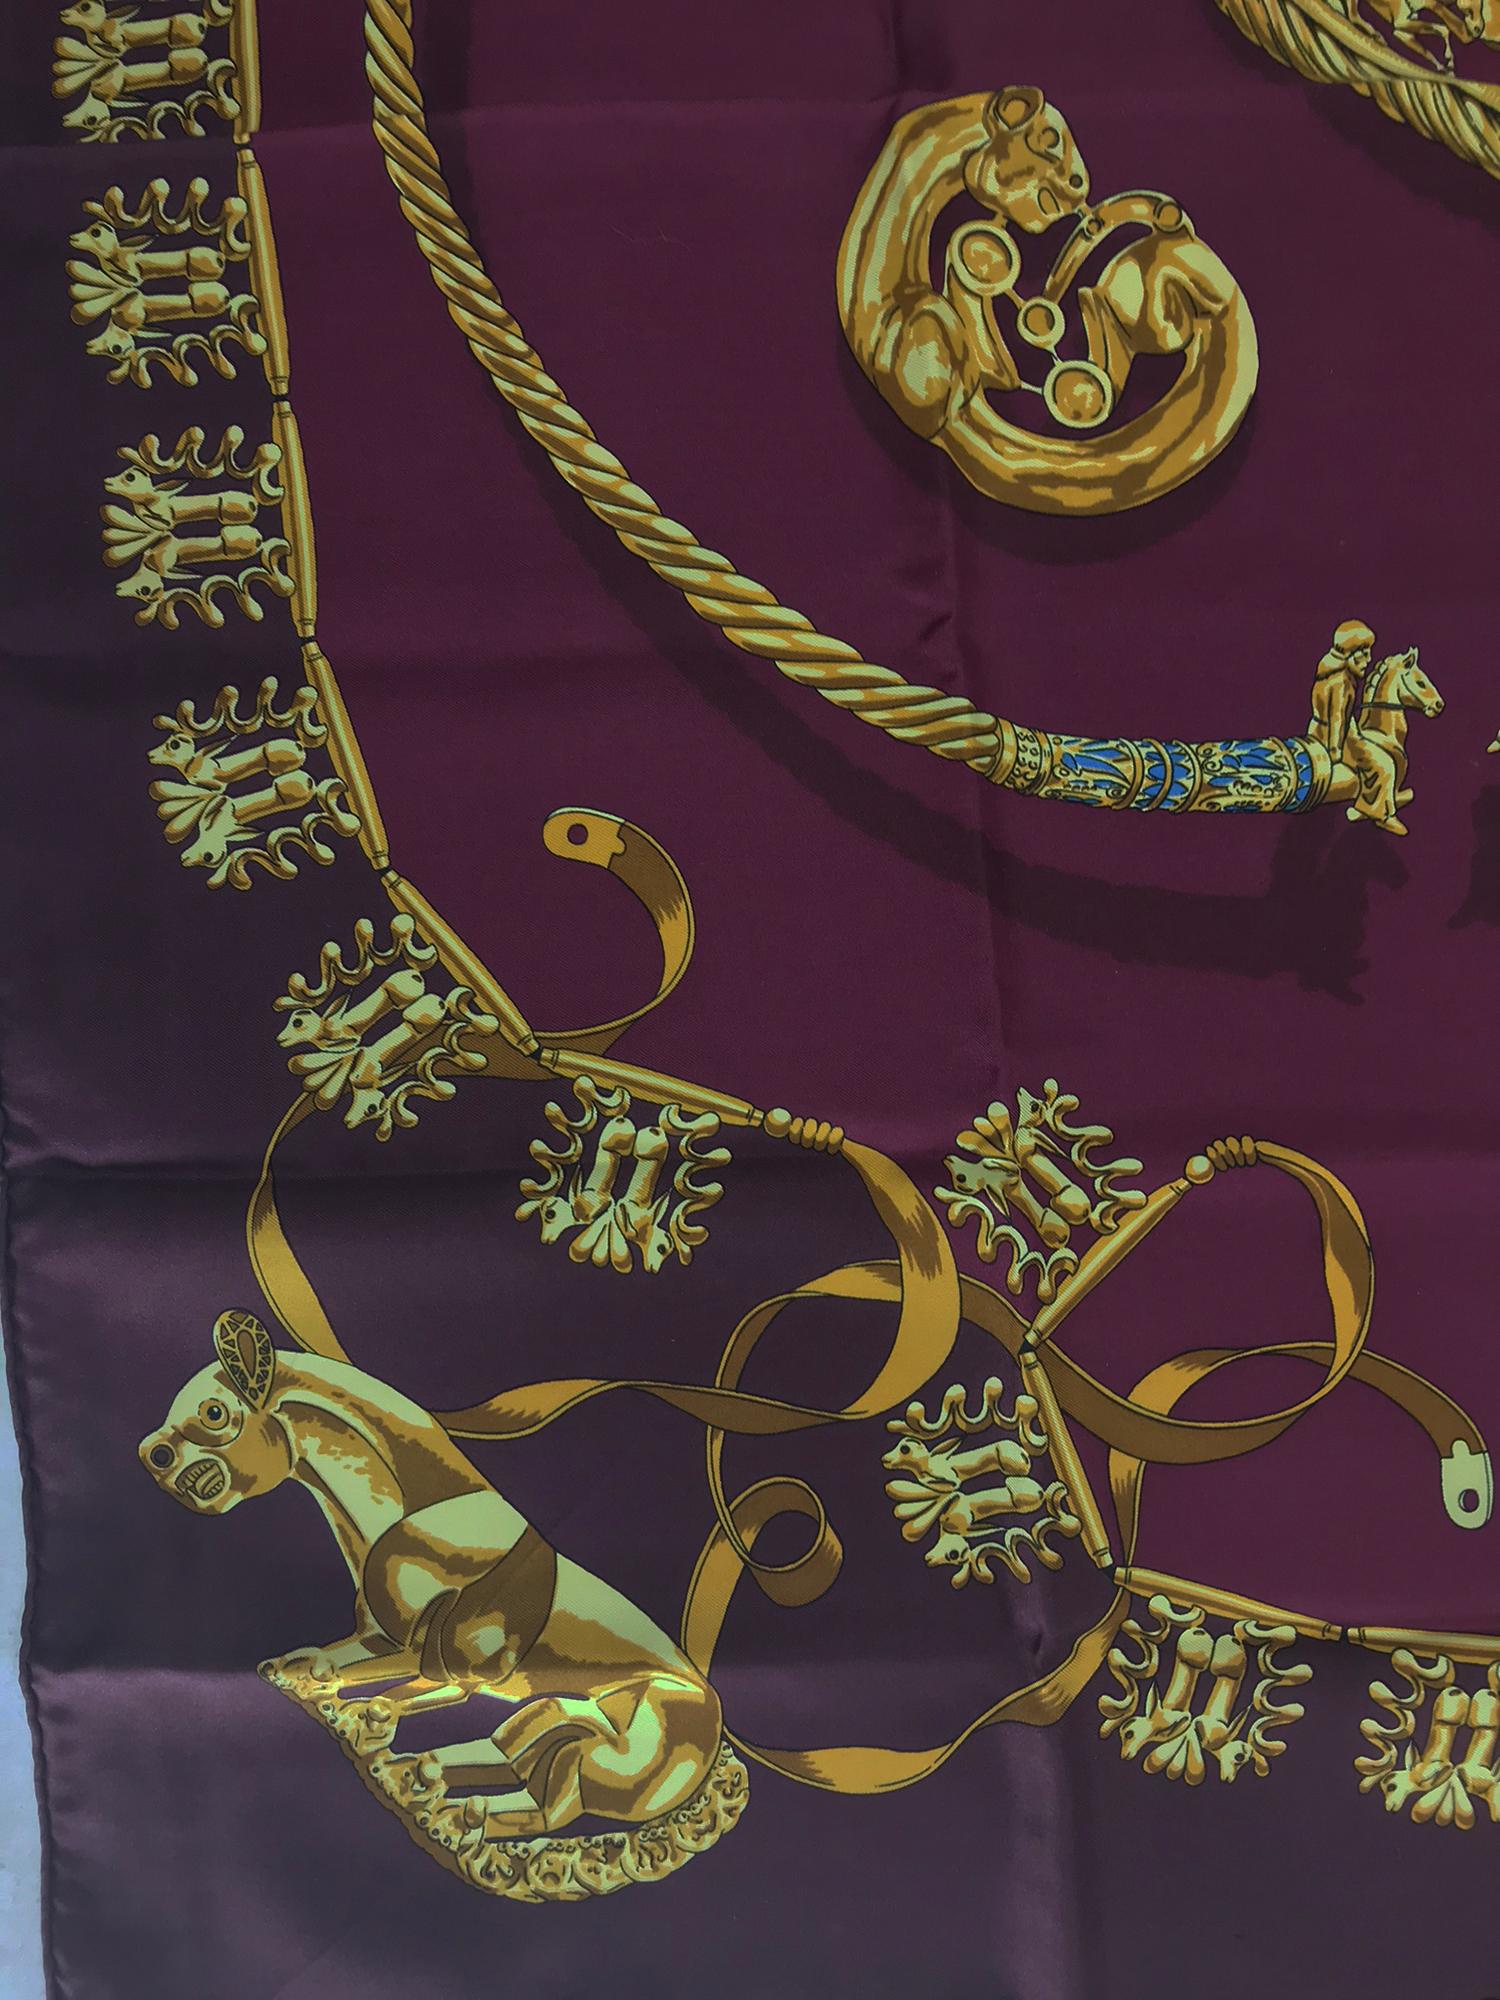 Hermes Les Cavaliers D'Or Silk Twill Scarf designed by Vladimir Rybaltchenko, signed as Rybal, 1939 - 2002, the great-nephew of Philippe Ledoux and the father of Dimitri Rybaltchenko. This scarf was first issued in 1975 and reissued many times